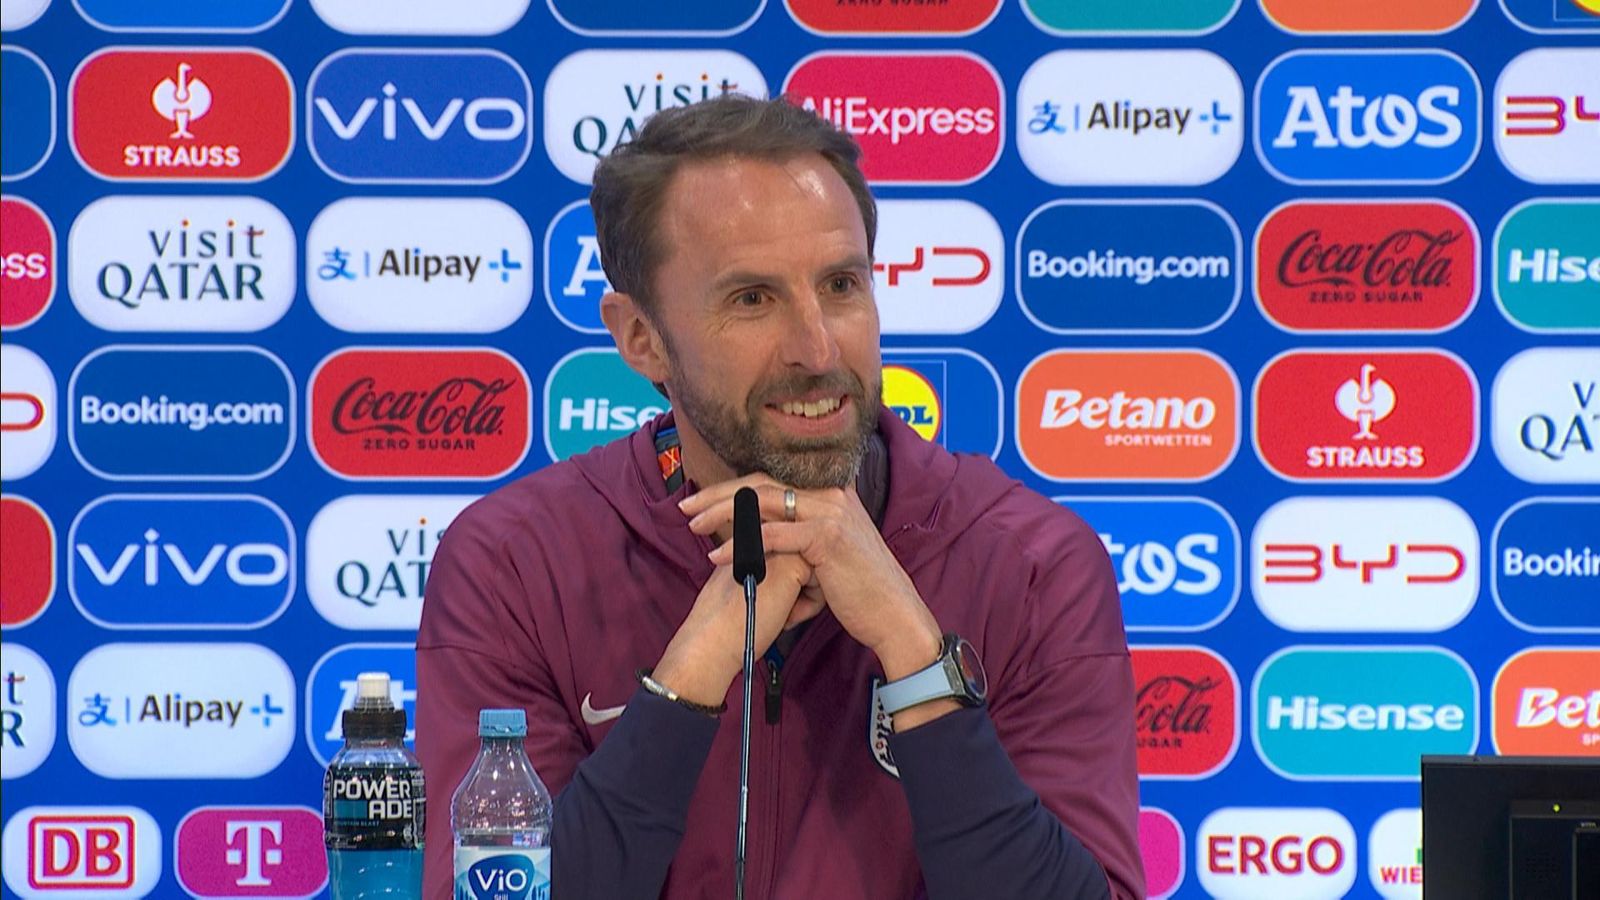 England v Serbia: Gareth Southgate tells fans he 'expects everybody to enjoy the football' when asked about match security risk